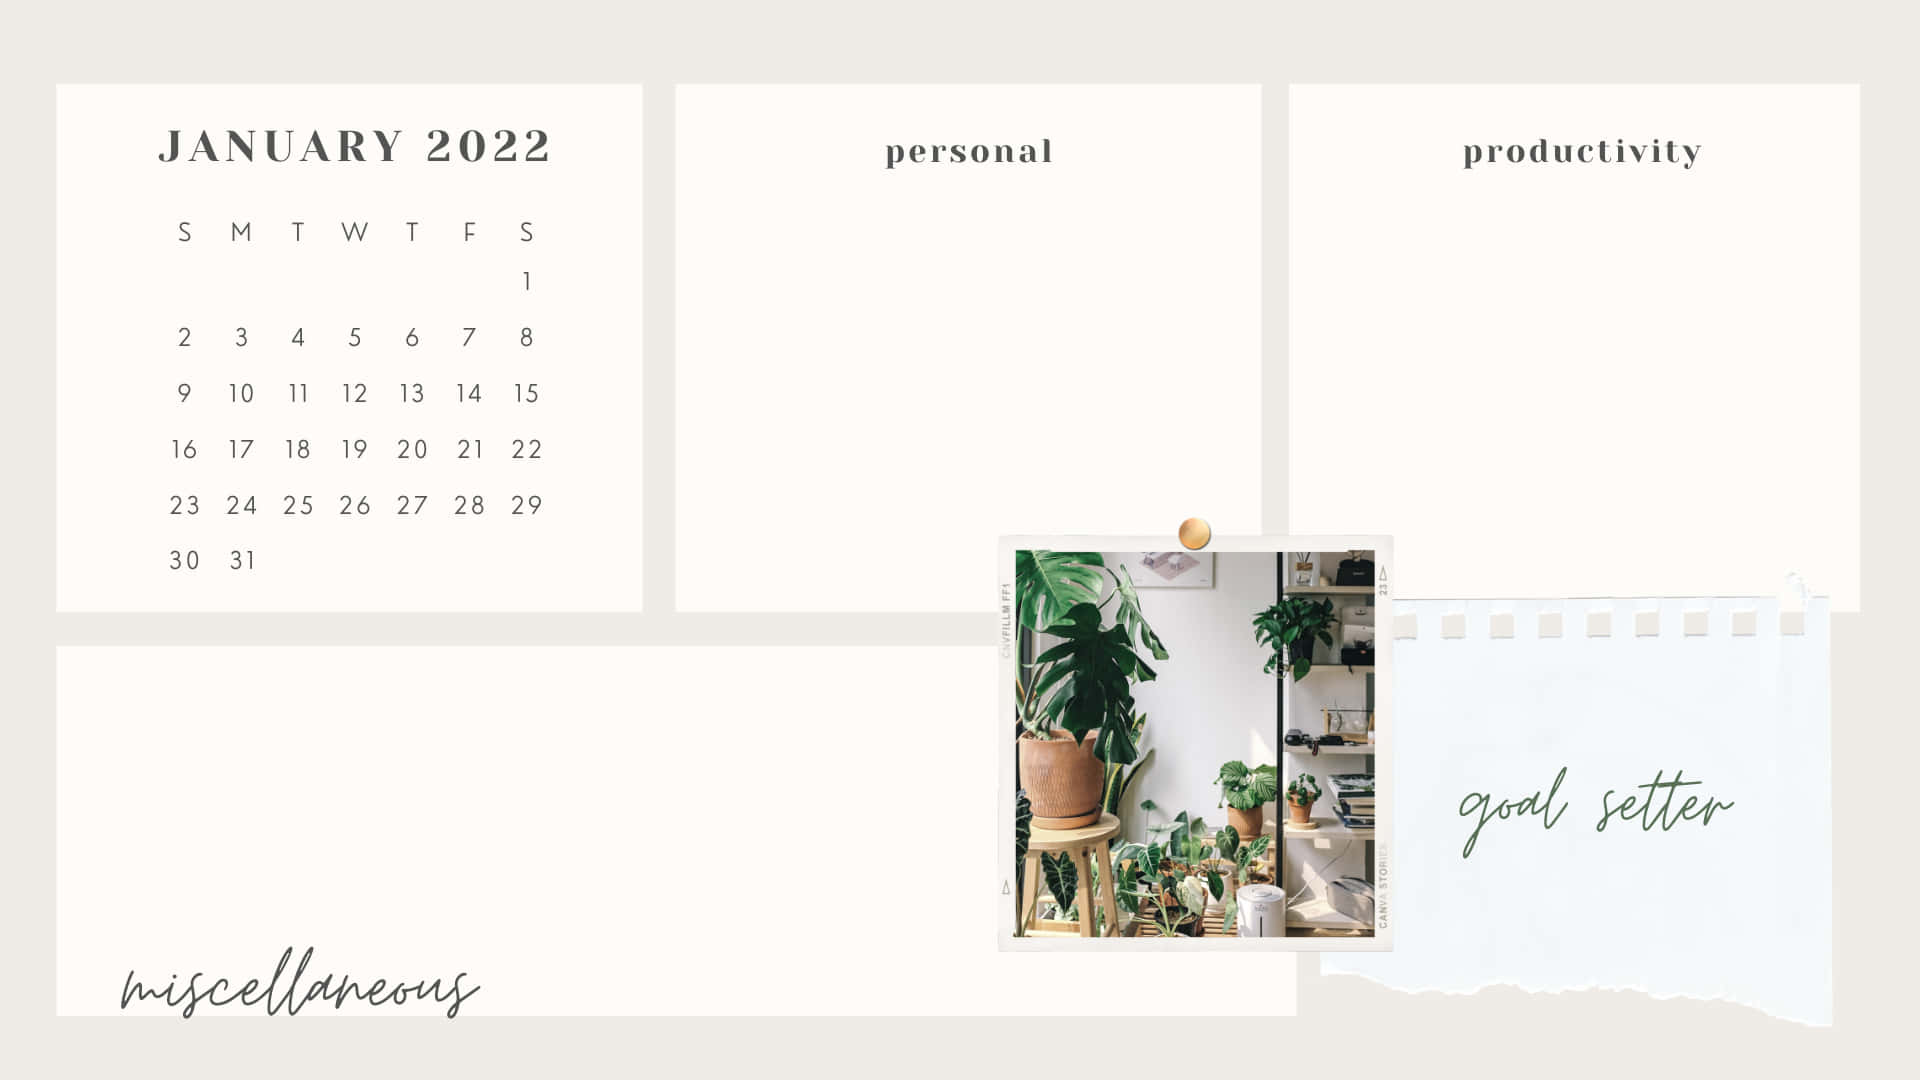 A Calendar With A Plant And A Planter Wallpaper